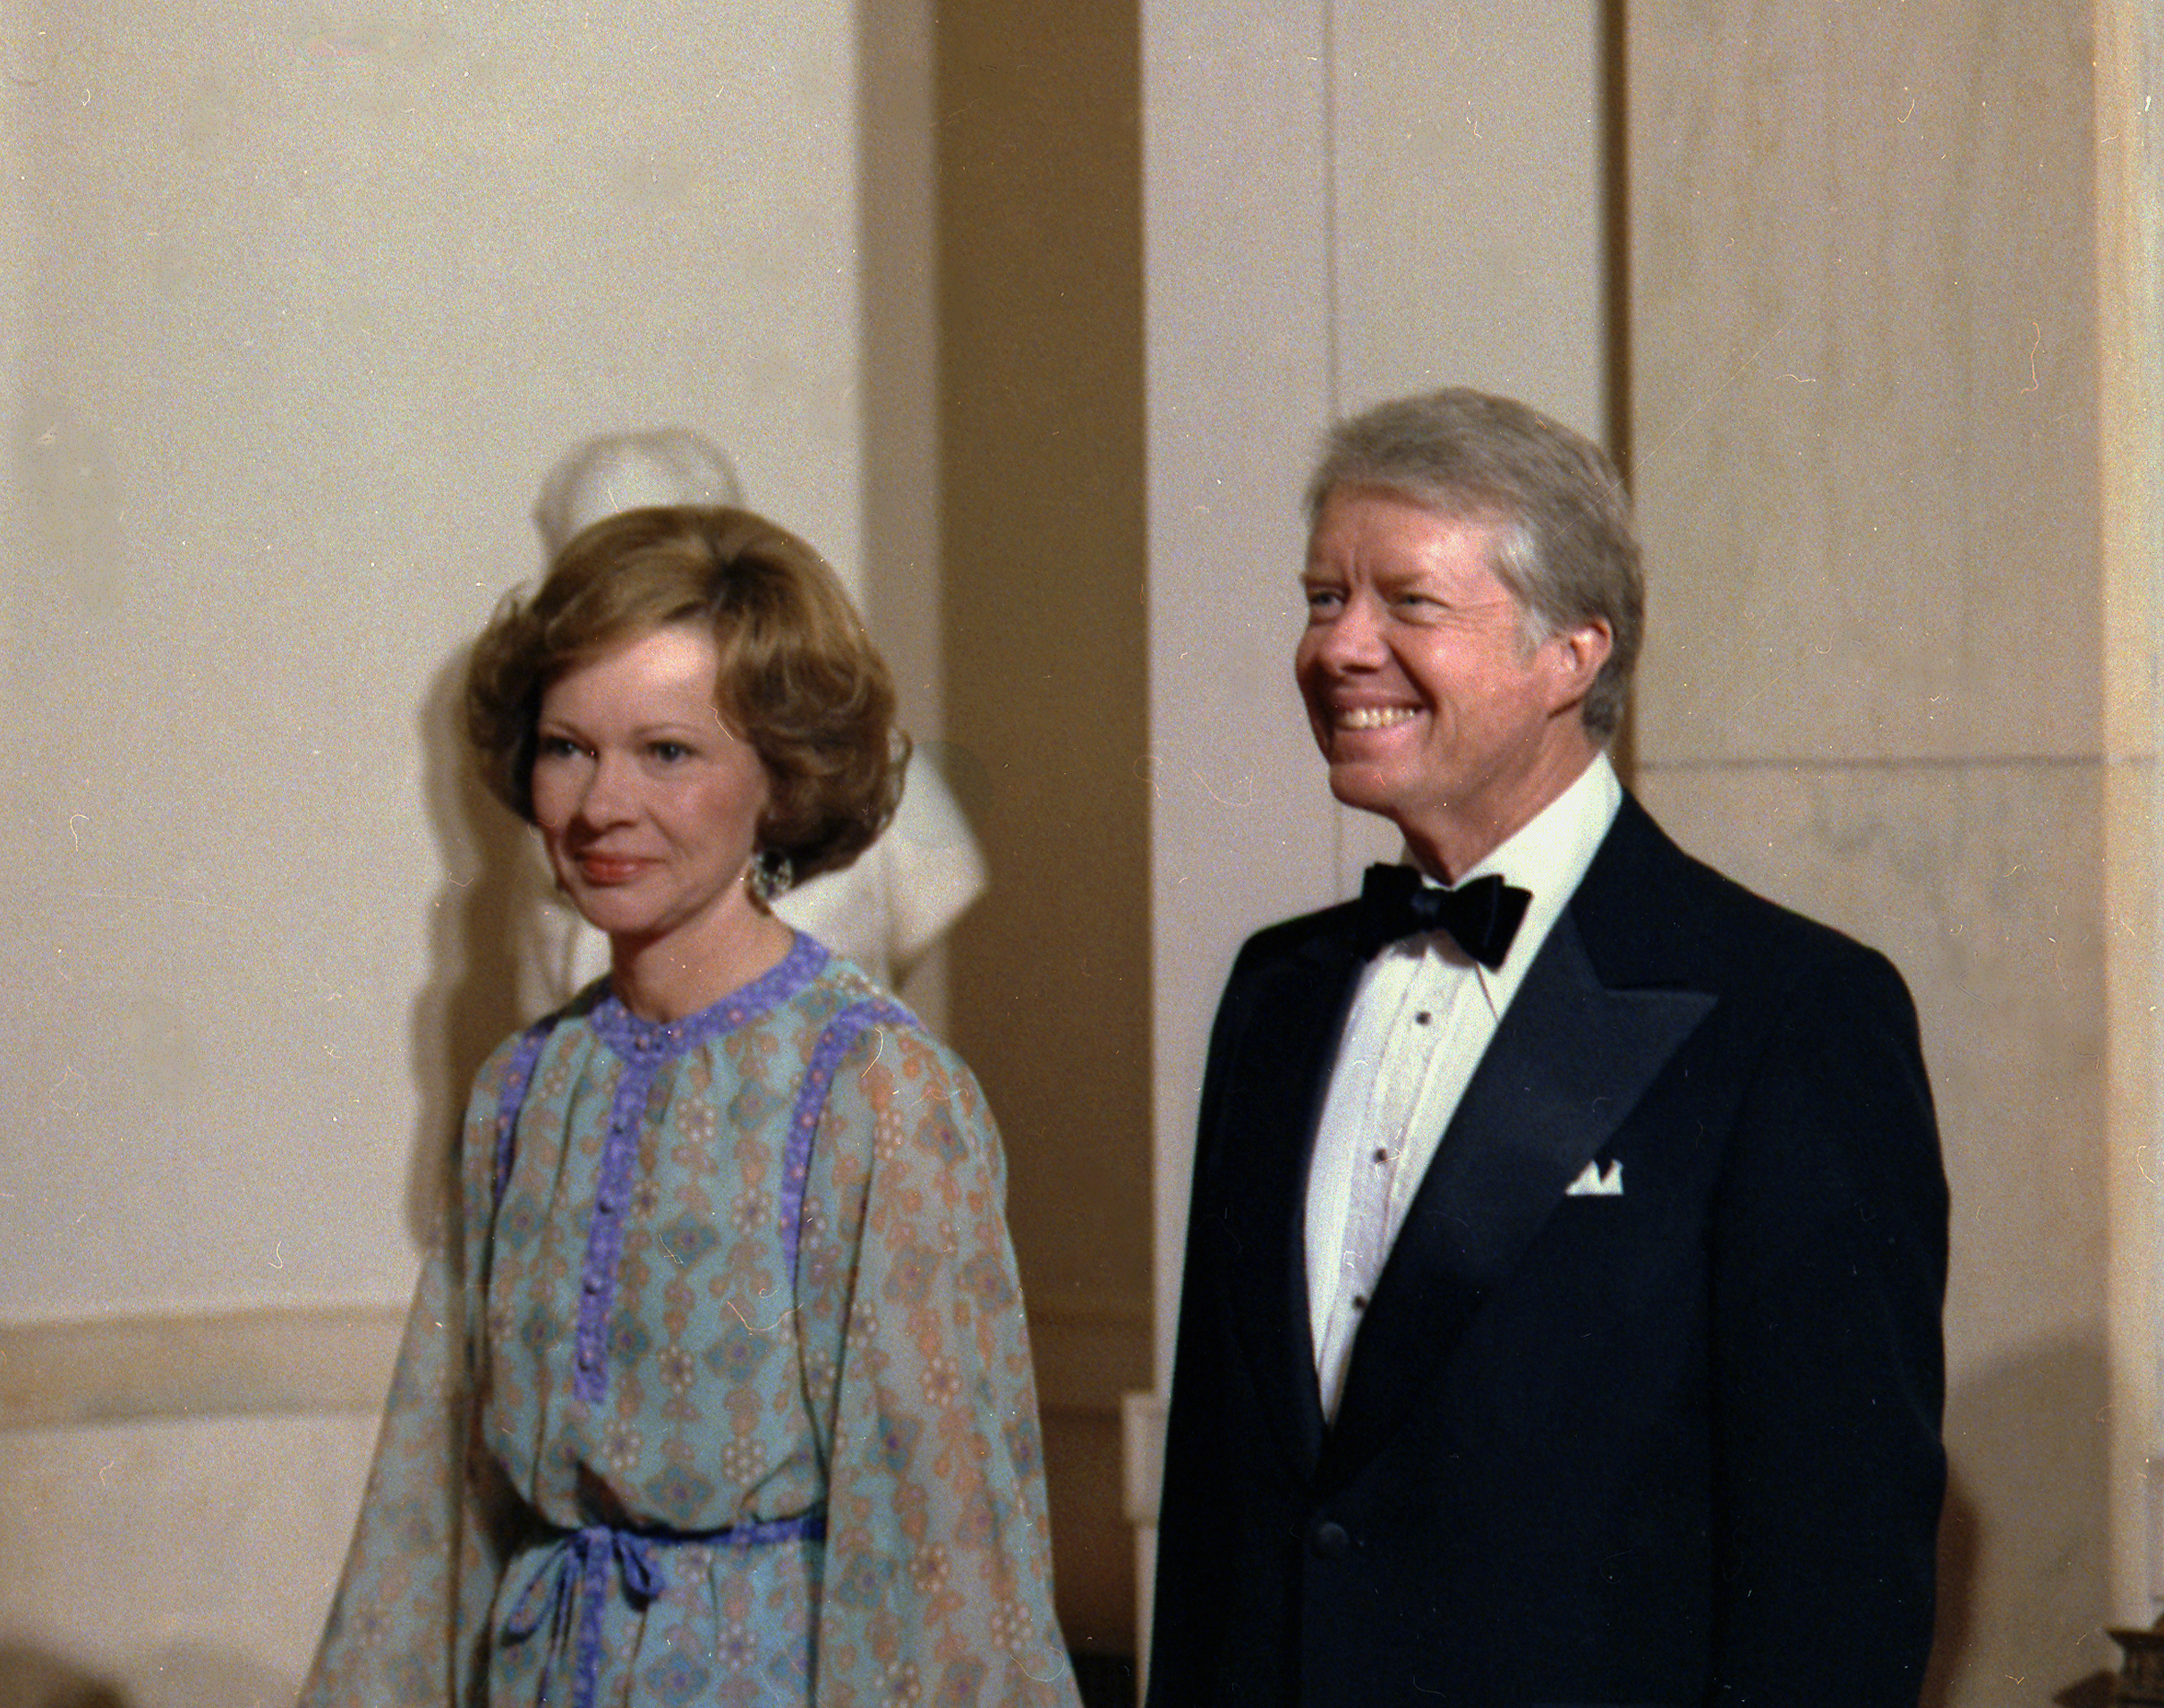 Rosalynn and Jimmy Carter at a formal event in 1978. | Source: Getty Images